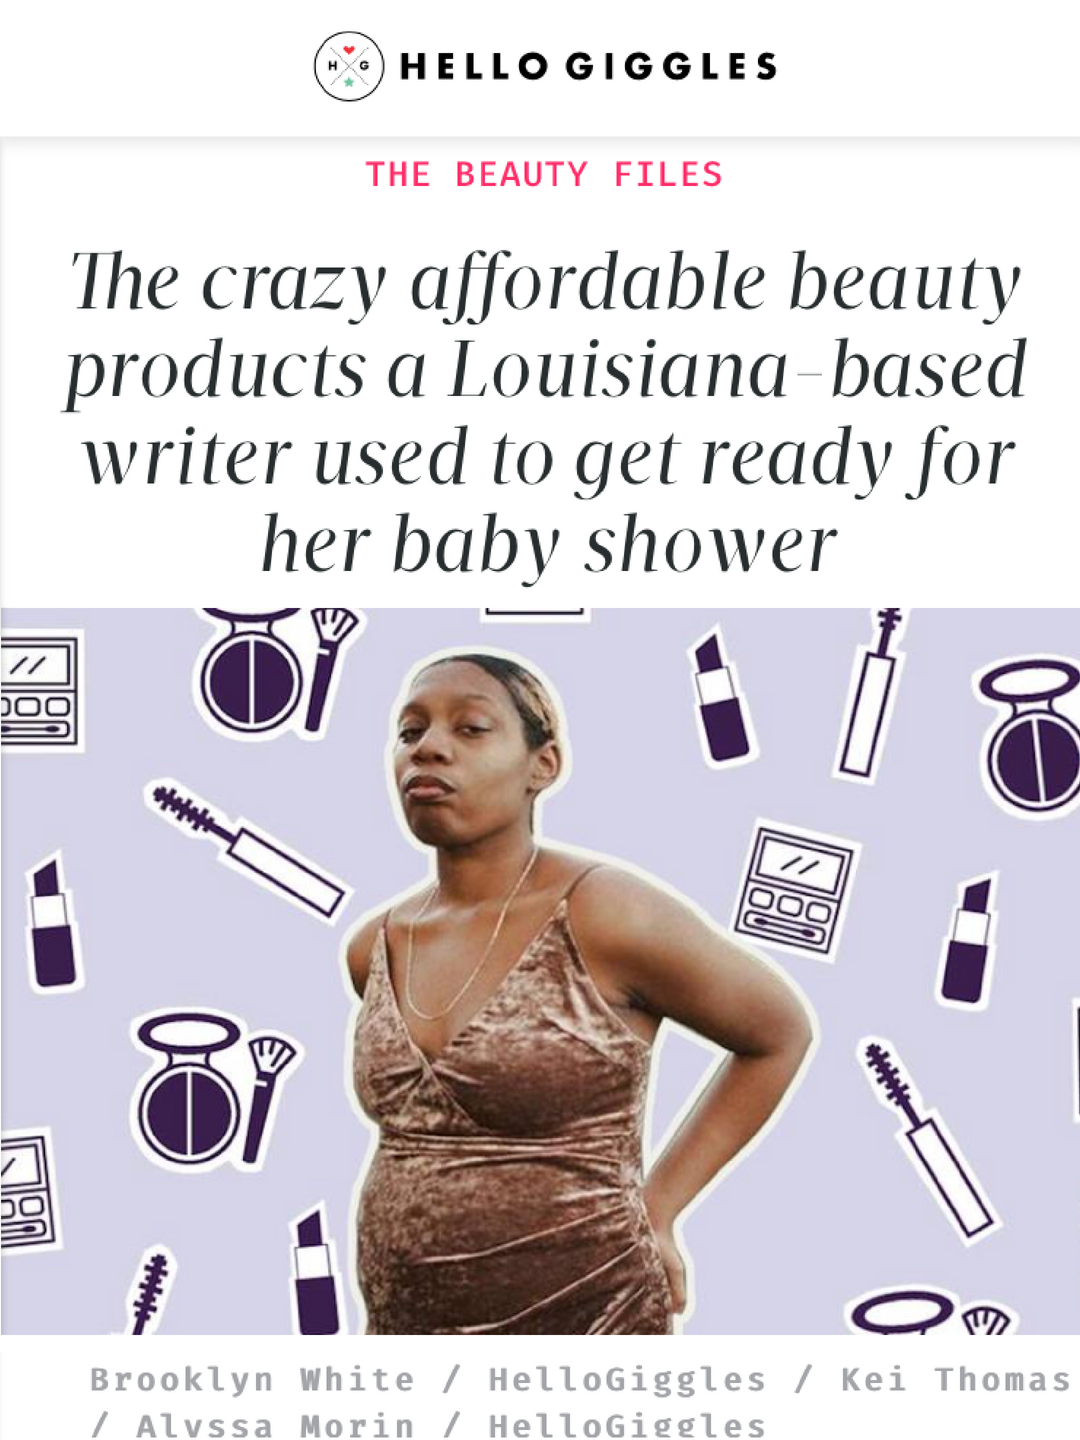 The Crazy Affordable Beauty Products a Louisiana Based Writer Used to Get Ready for Her Baby Shower